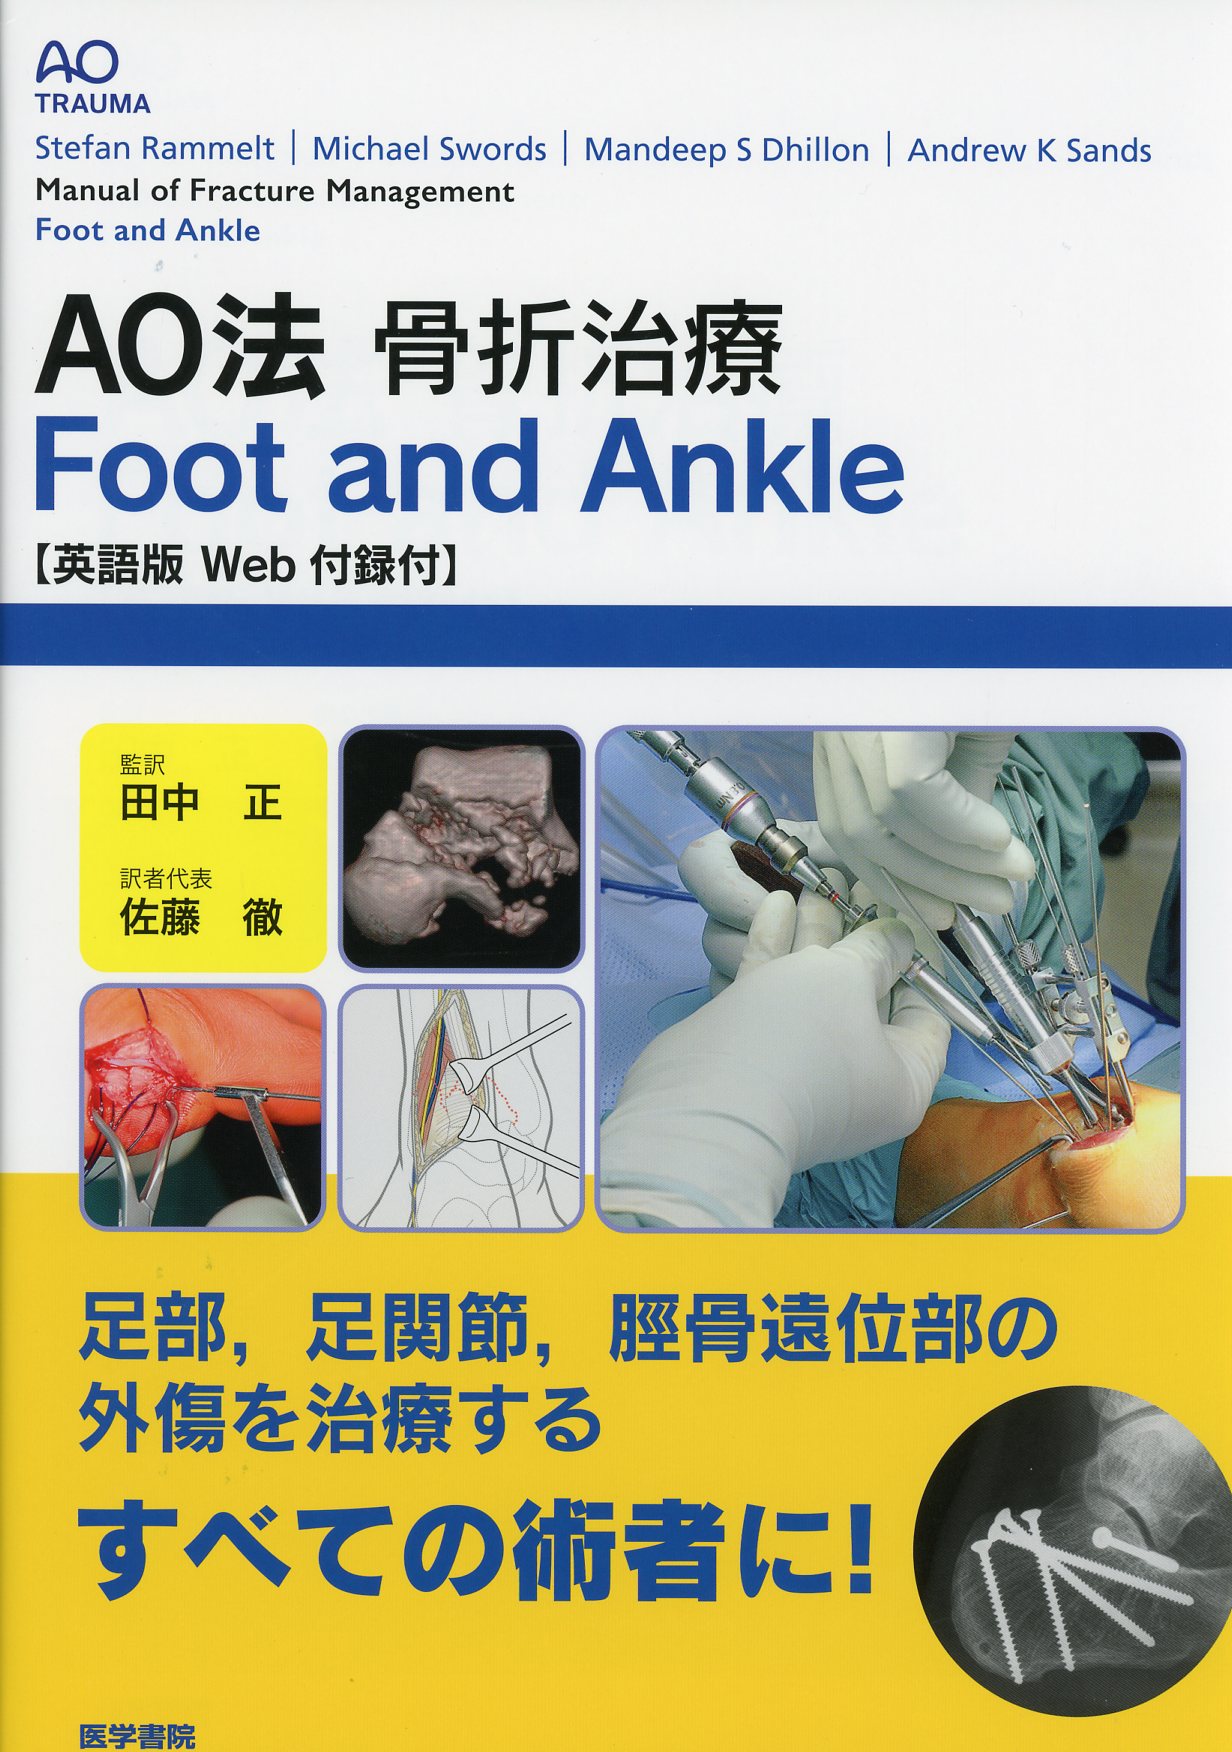 AO法骨折治療 Foot and Ankle ［英語版Web付録付］